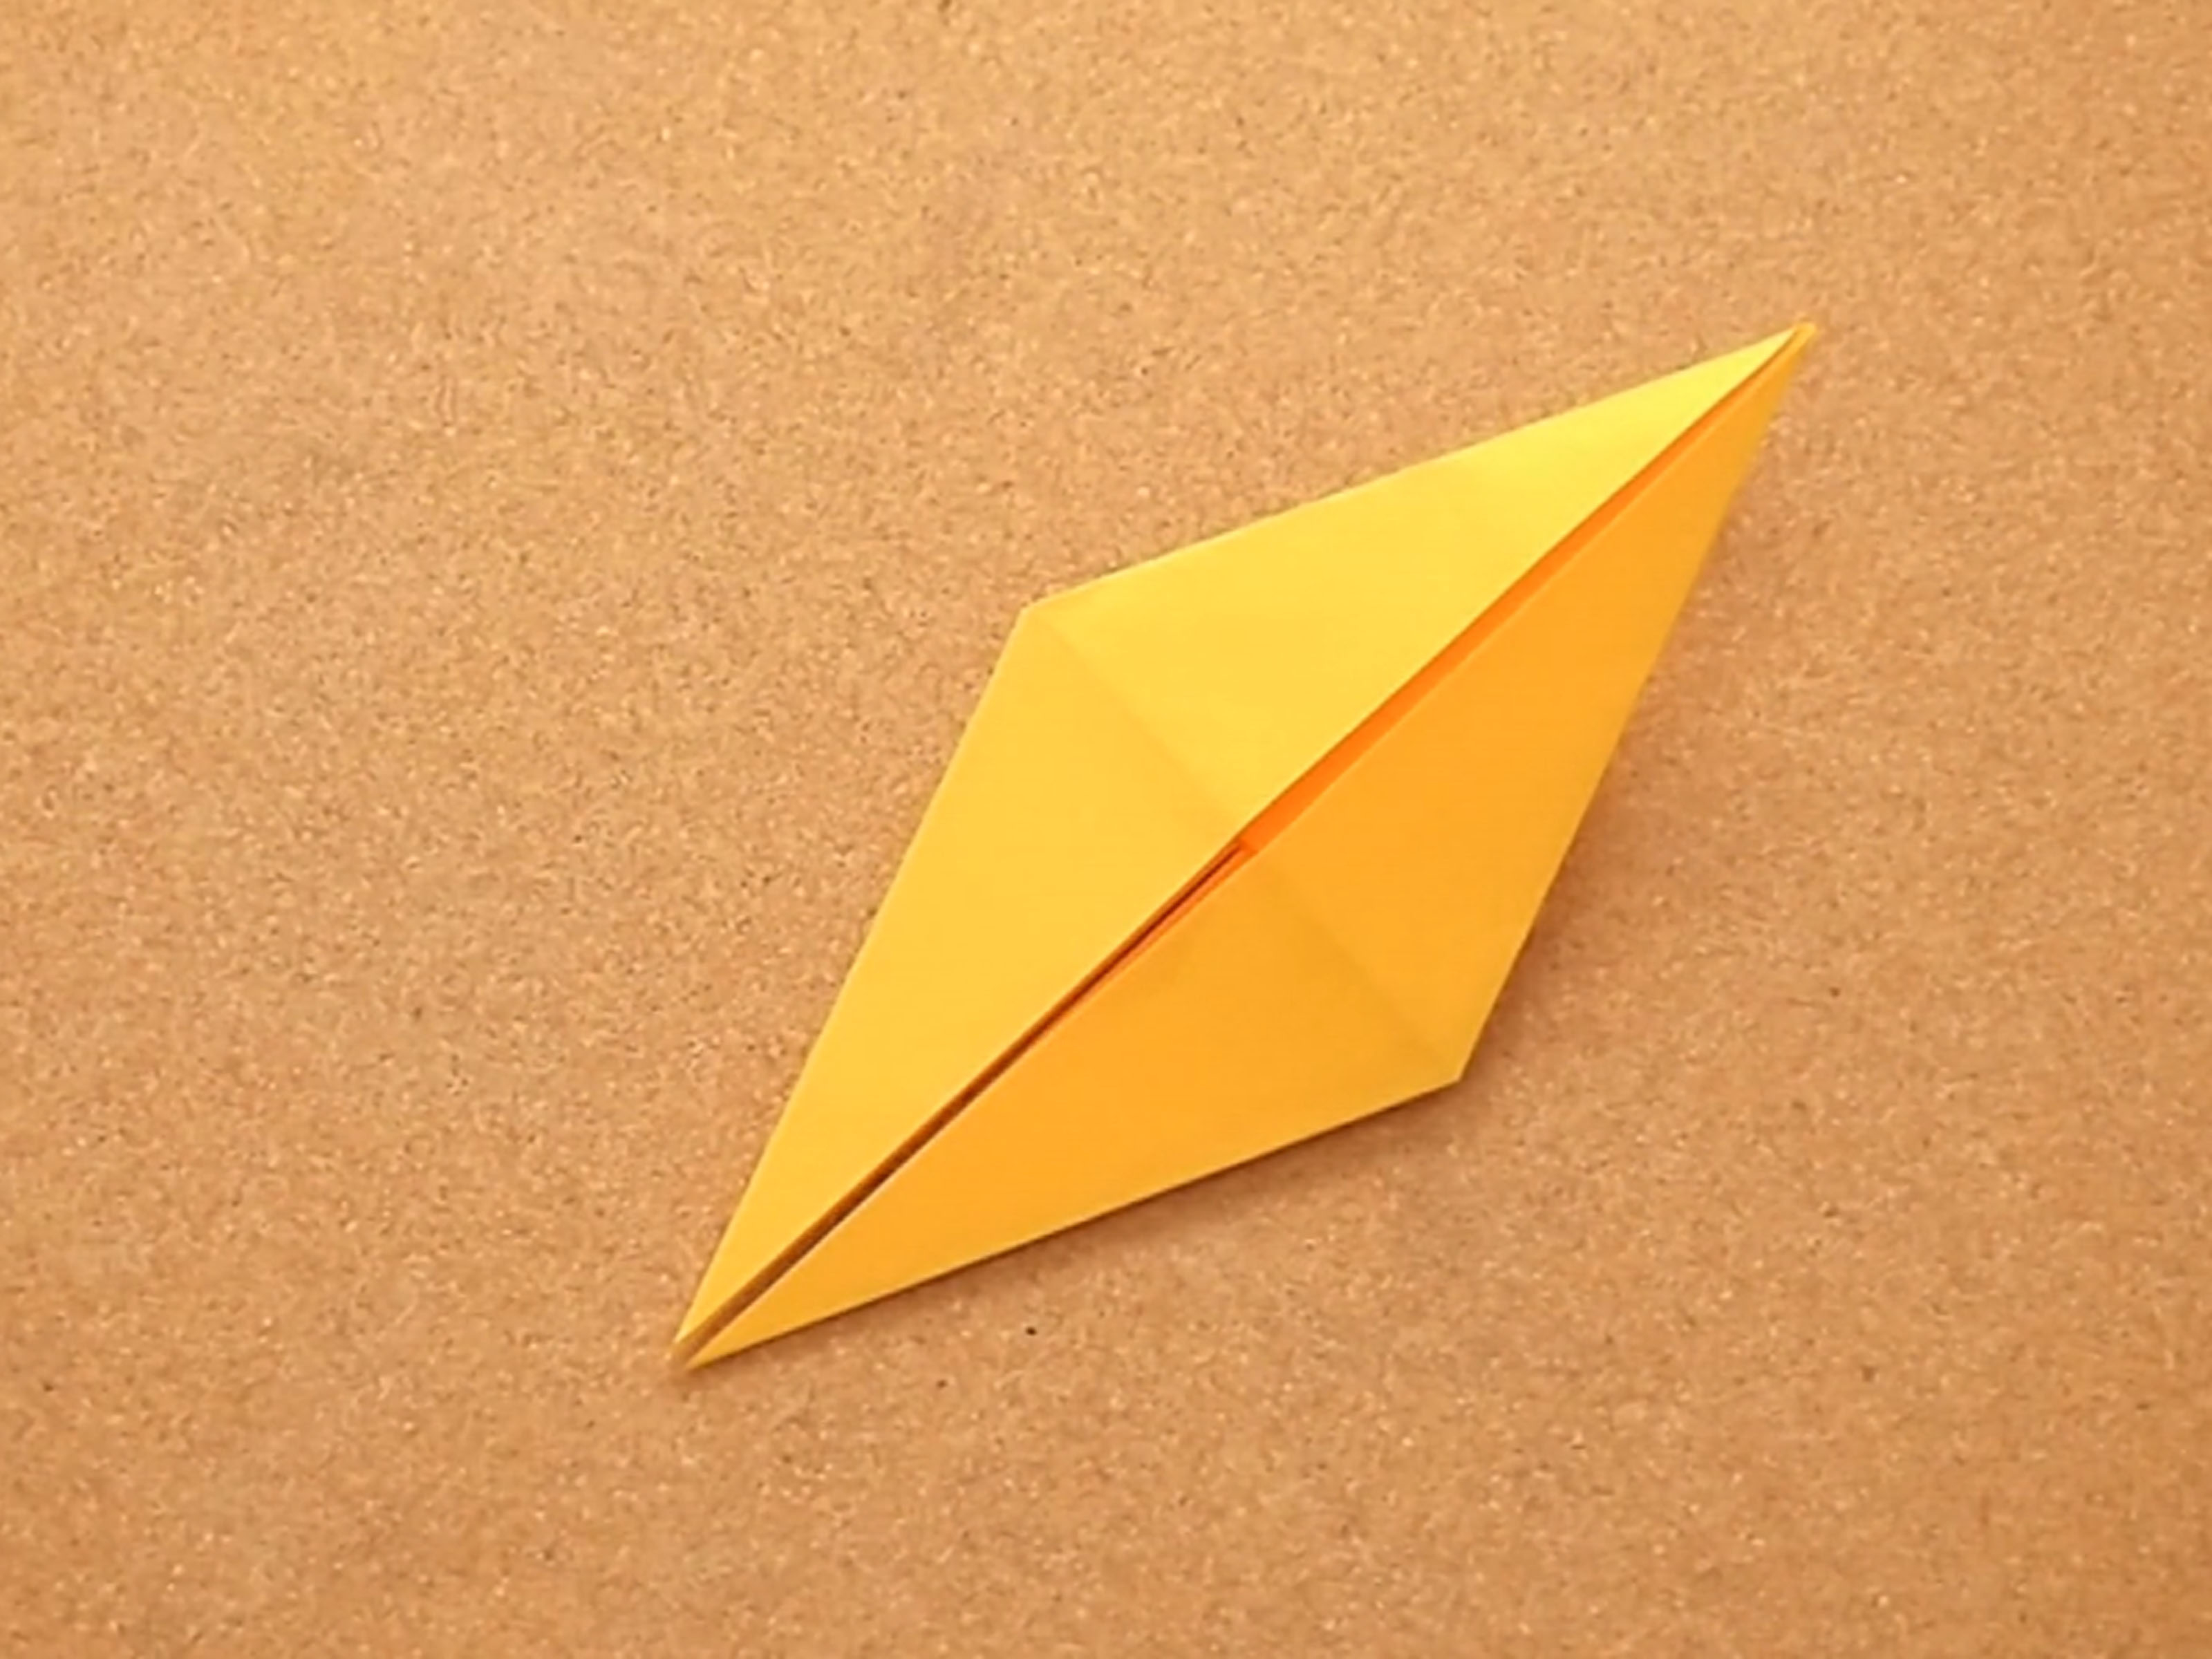 How To Do Origami Bird Step By Step How To Make An Origami Bird Base 13 Steps With Pictures